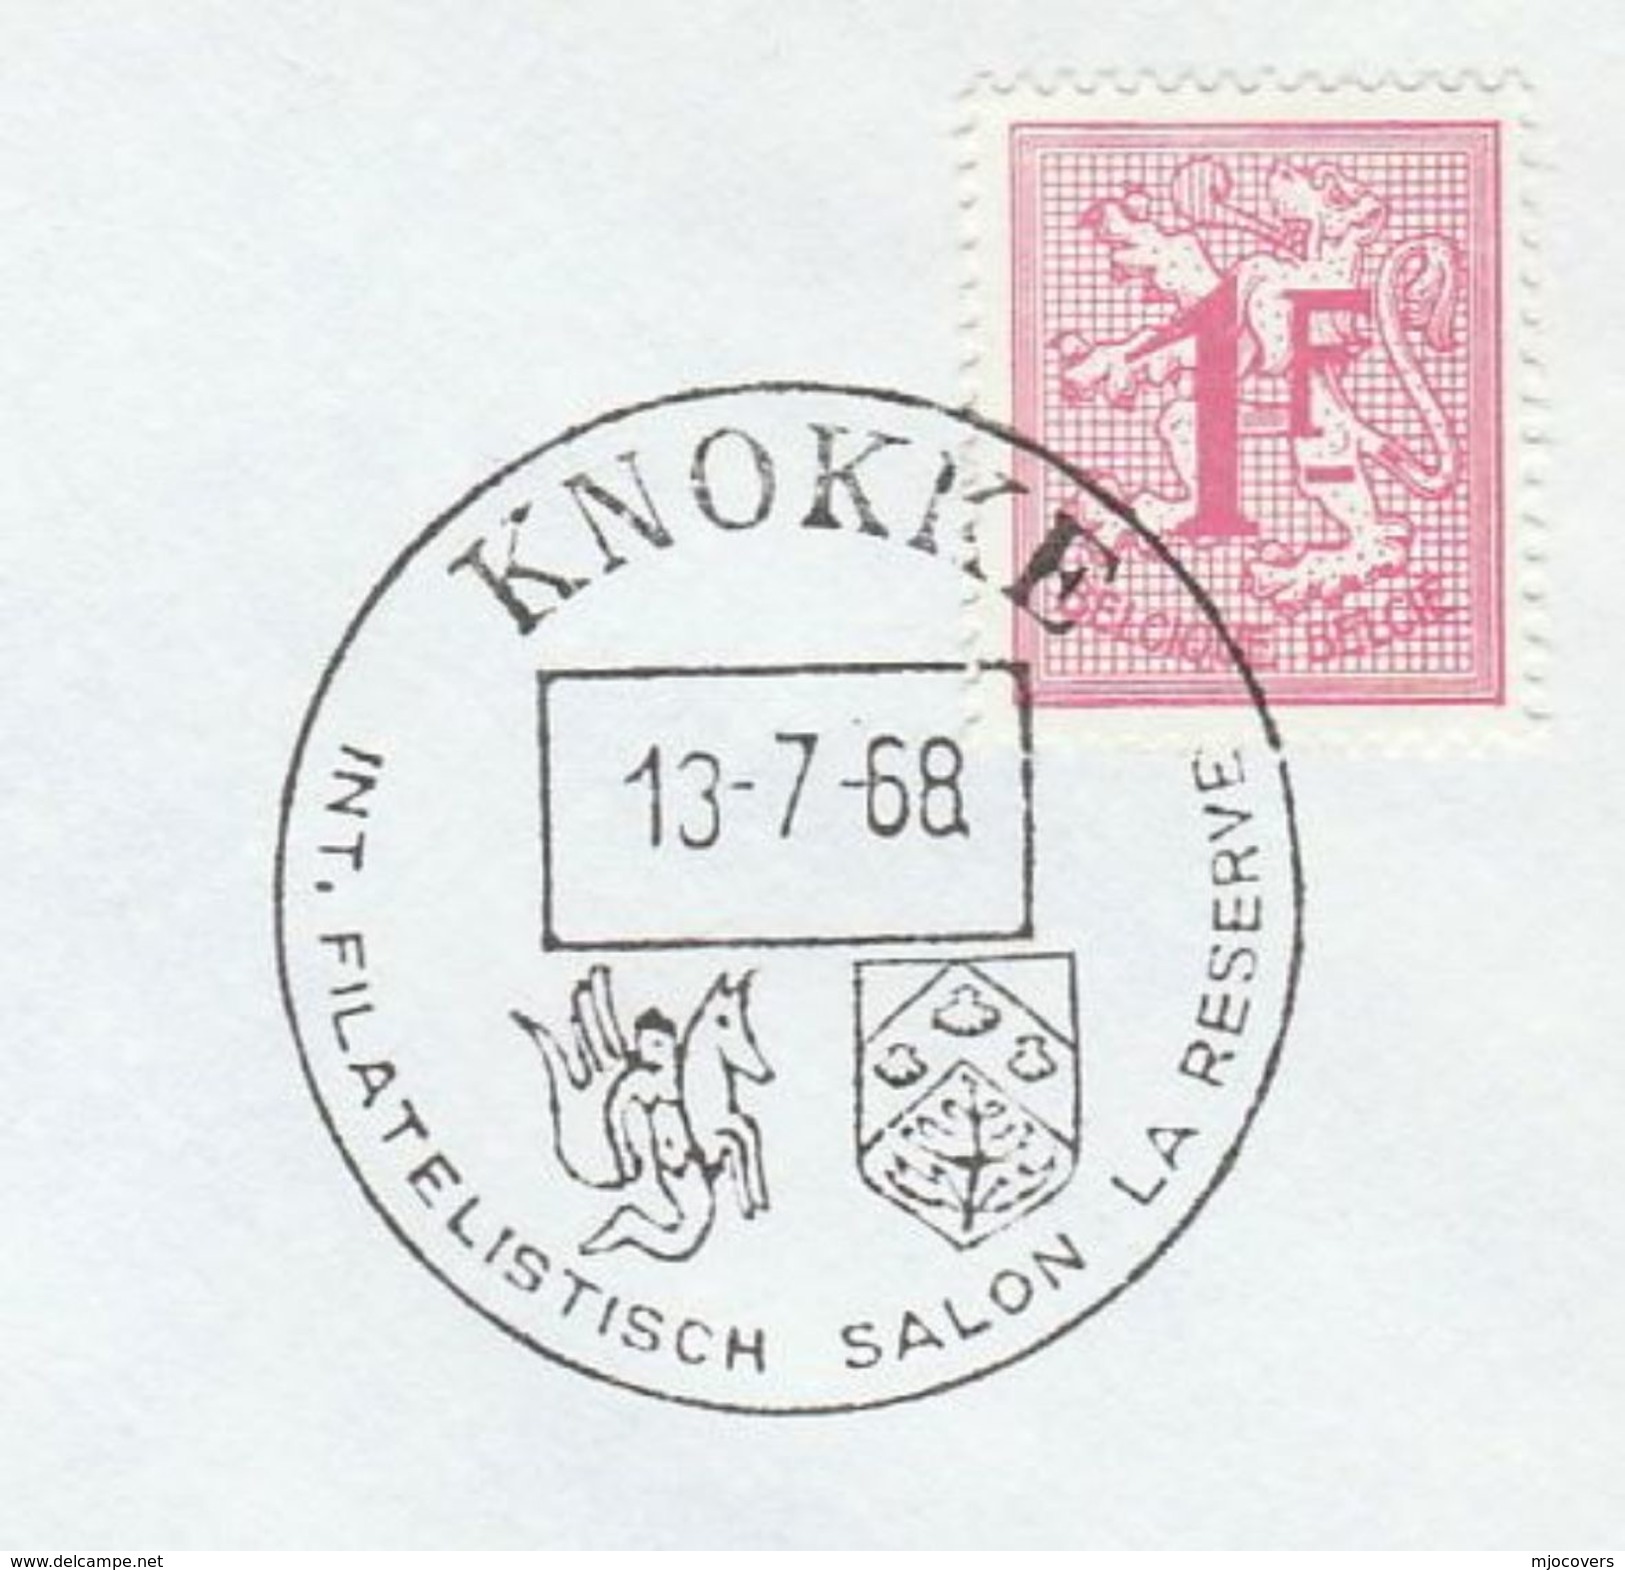 1968 Knokke MERMAID ?  EVENT COVER Coat Of Arms Philatelic Exhibition, Stamps - Mitología